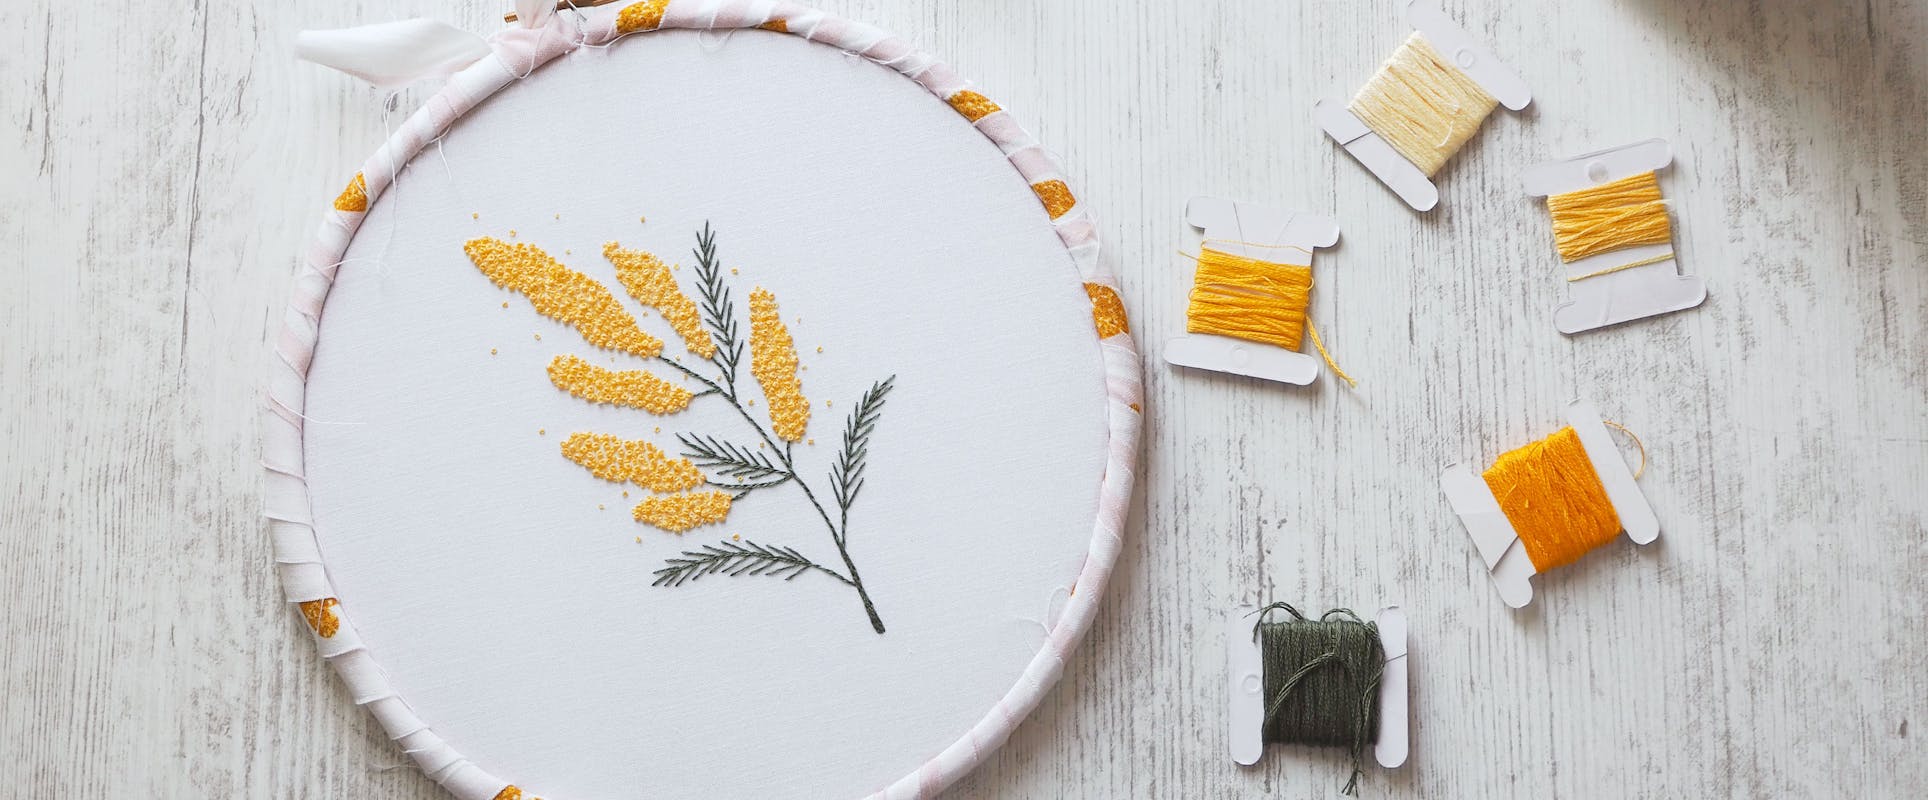 EMBROIDERY HOOP DIY Embroidery Kits for For Beginners $11.70